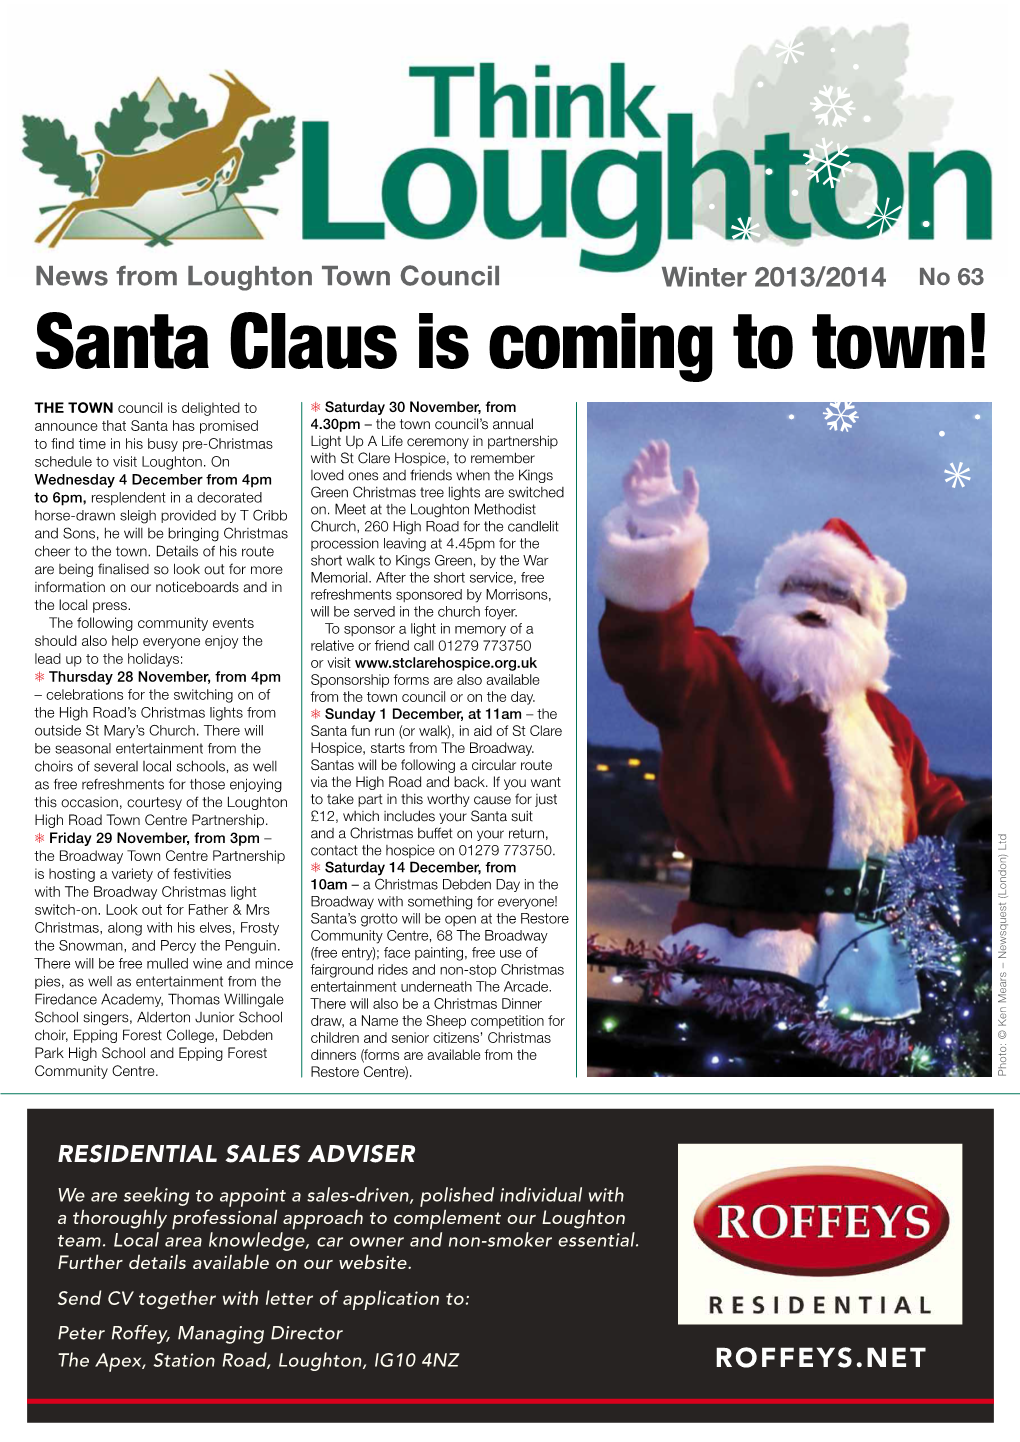 Santa Claus Is Coming to Town!